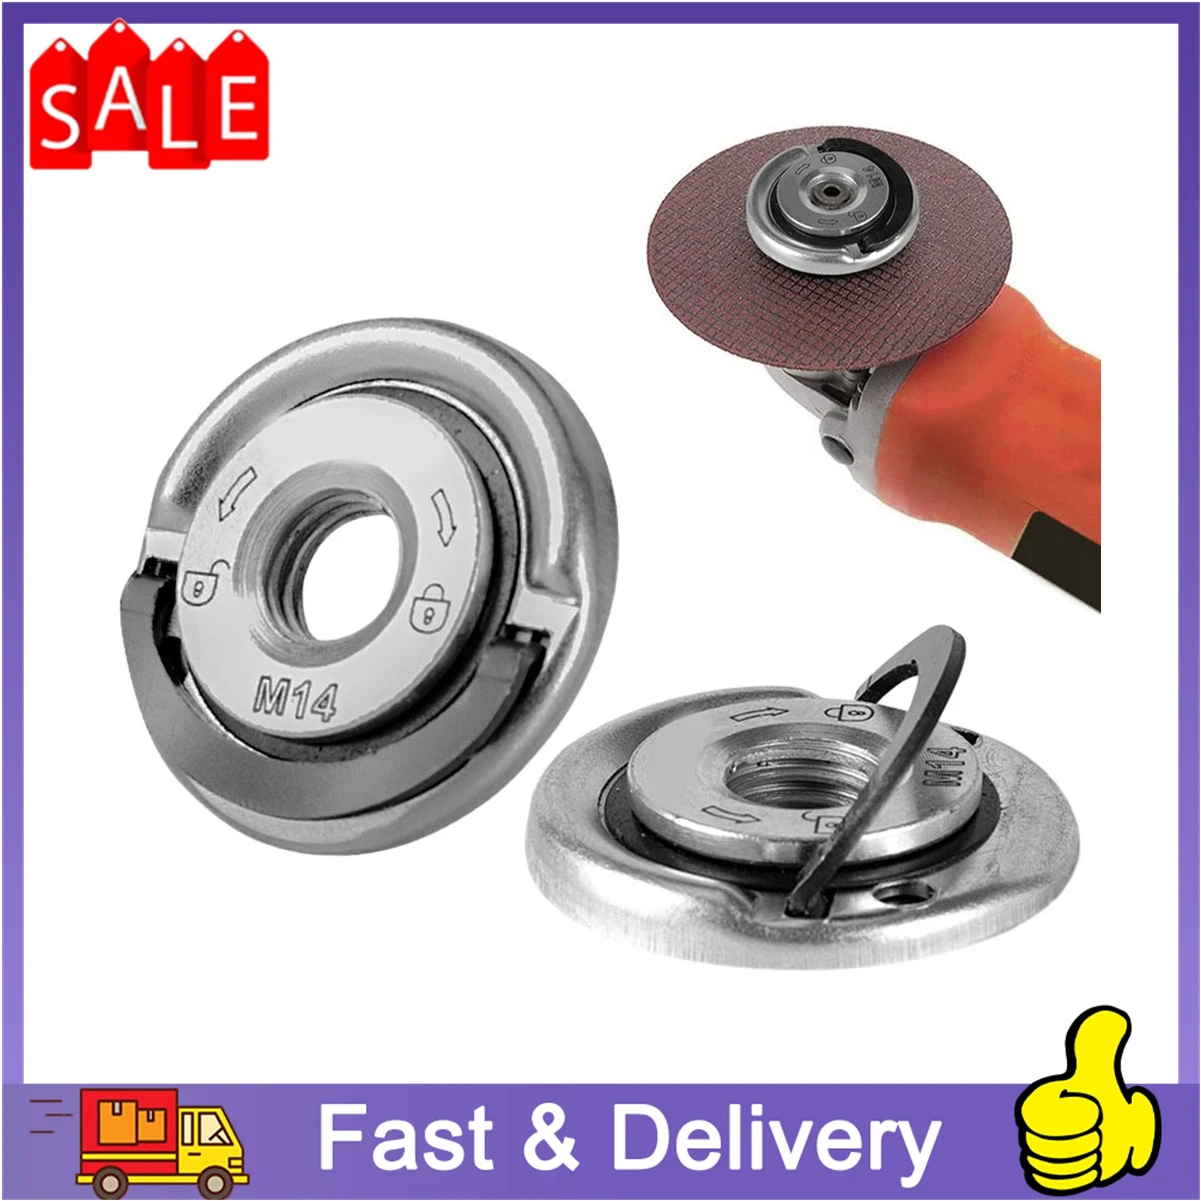 Quick Release Flange Nut M14 Thread Angle Grinder Release Locking Nut Pressing Plate For Angle Grinder Clamping Flange Accessory